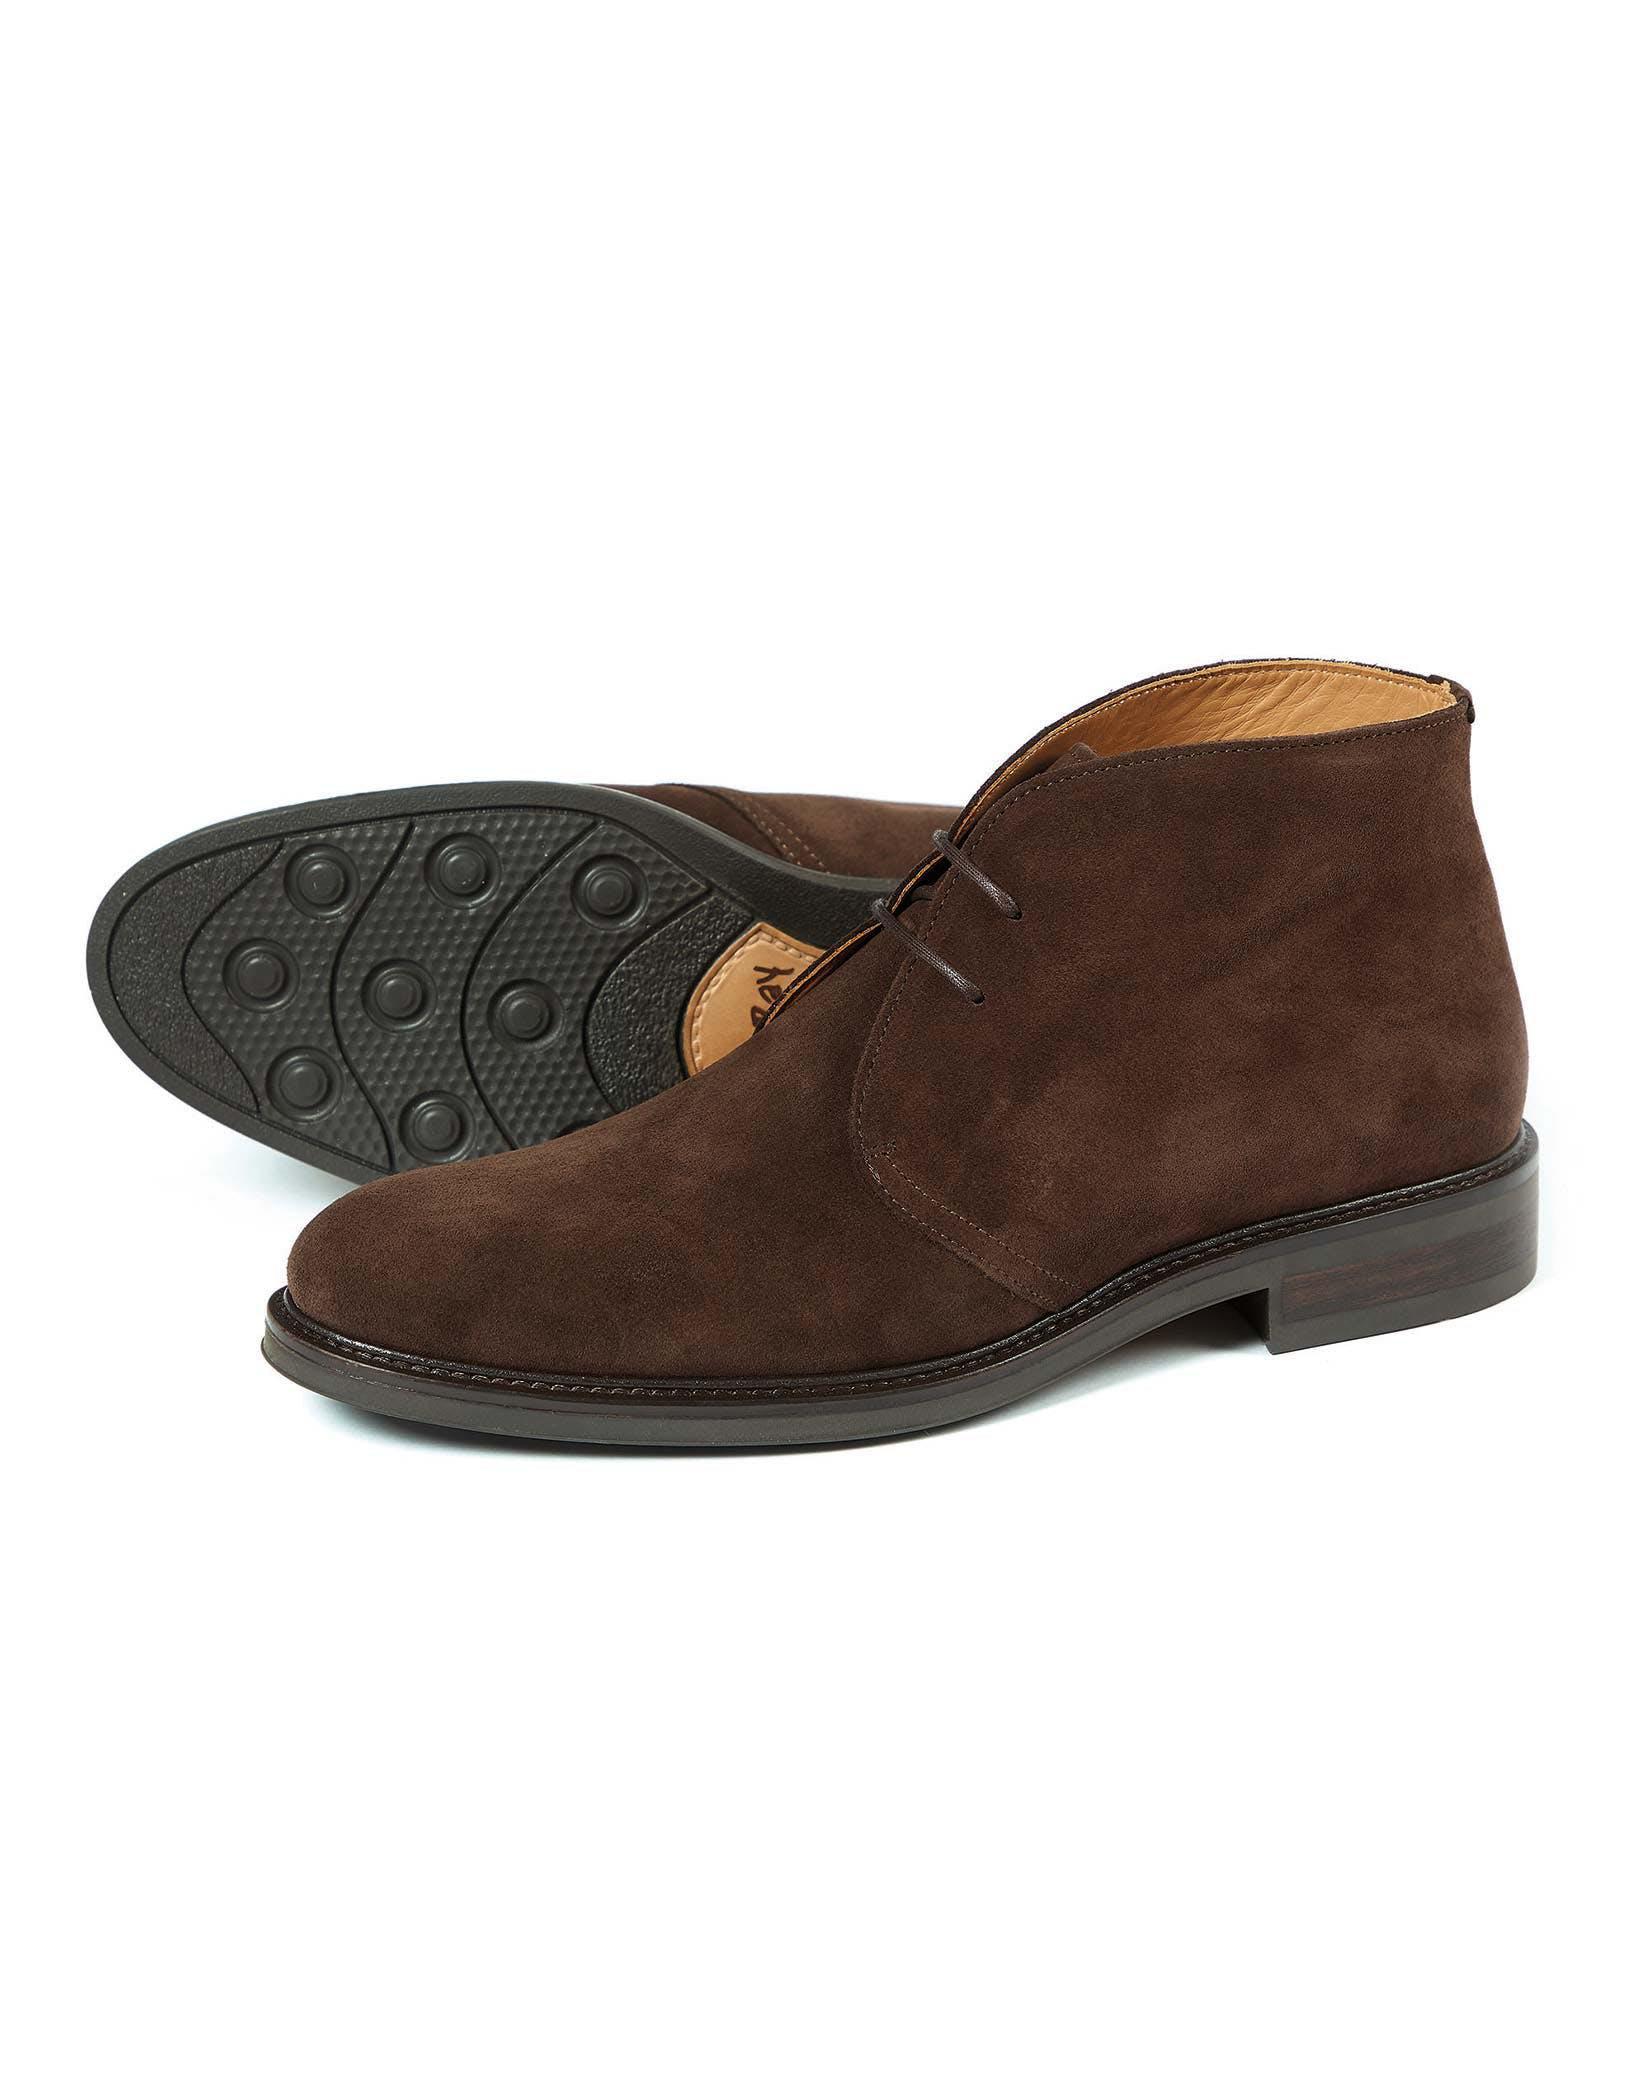 Ascot Boot - Brown Suede